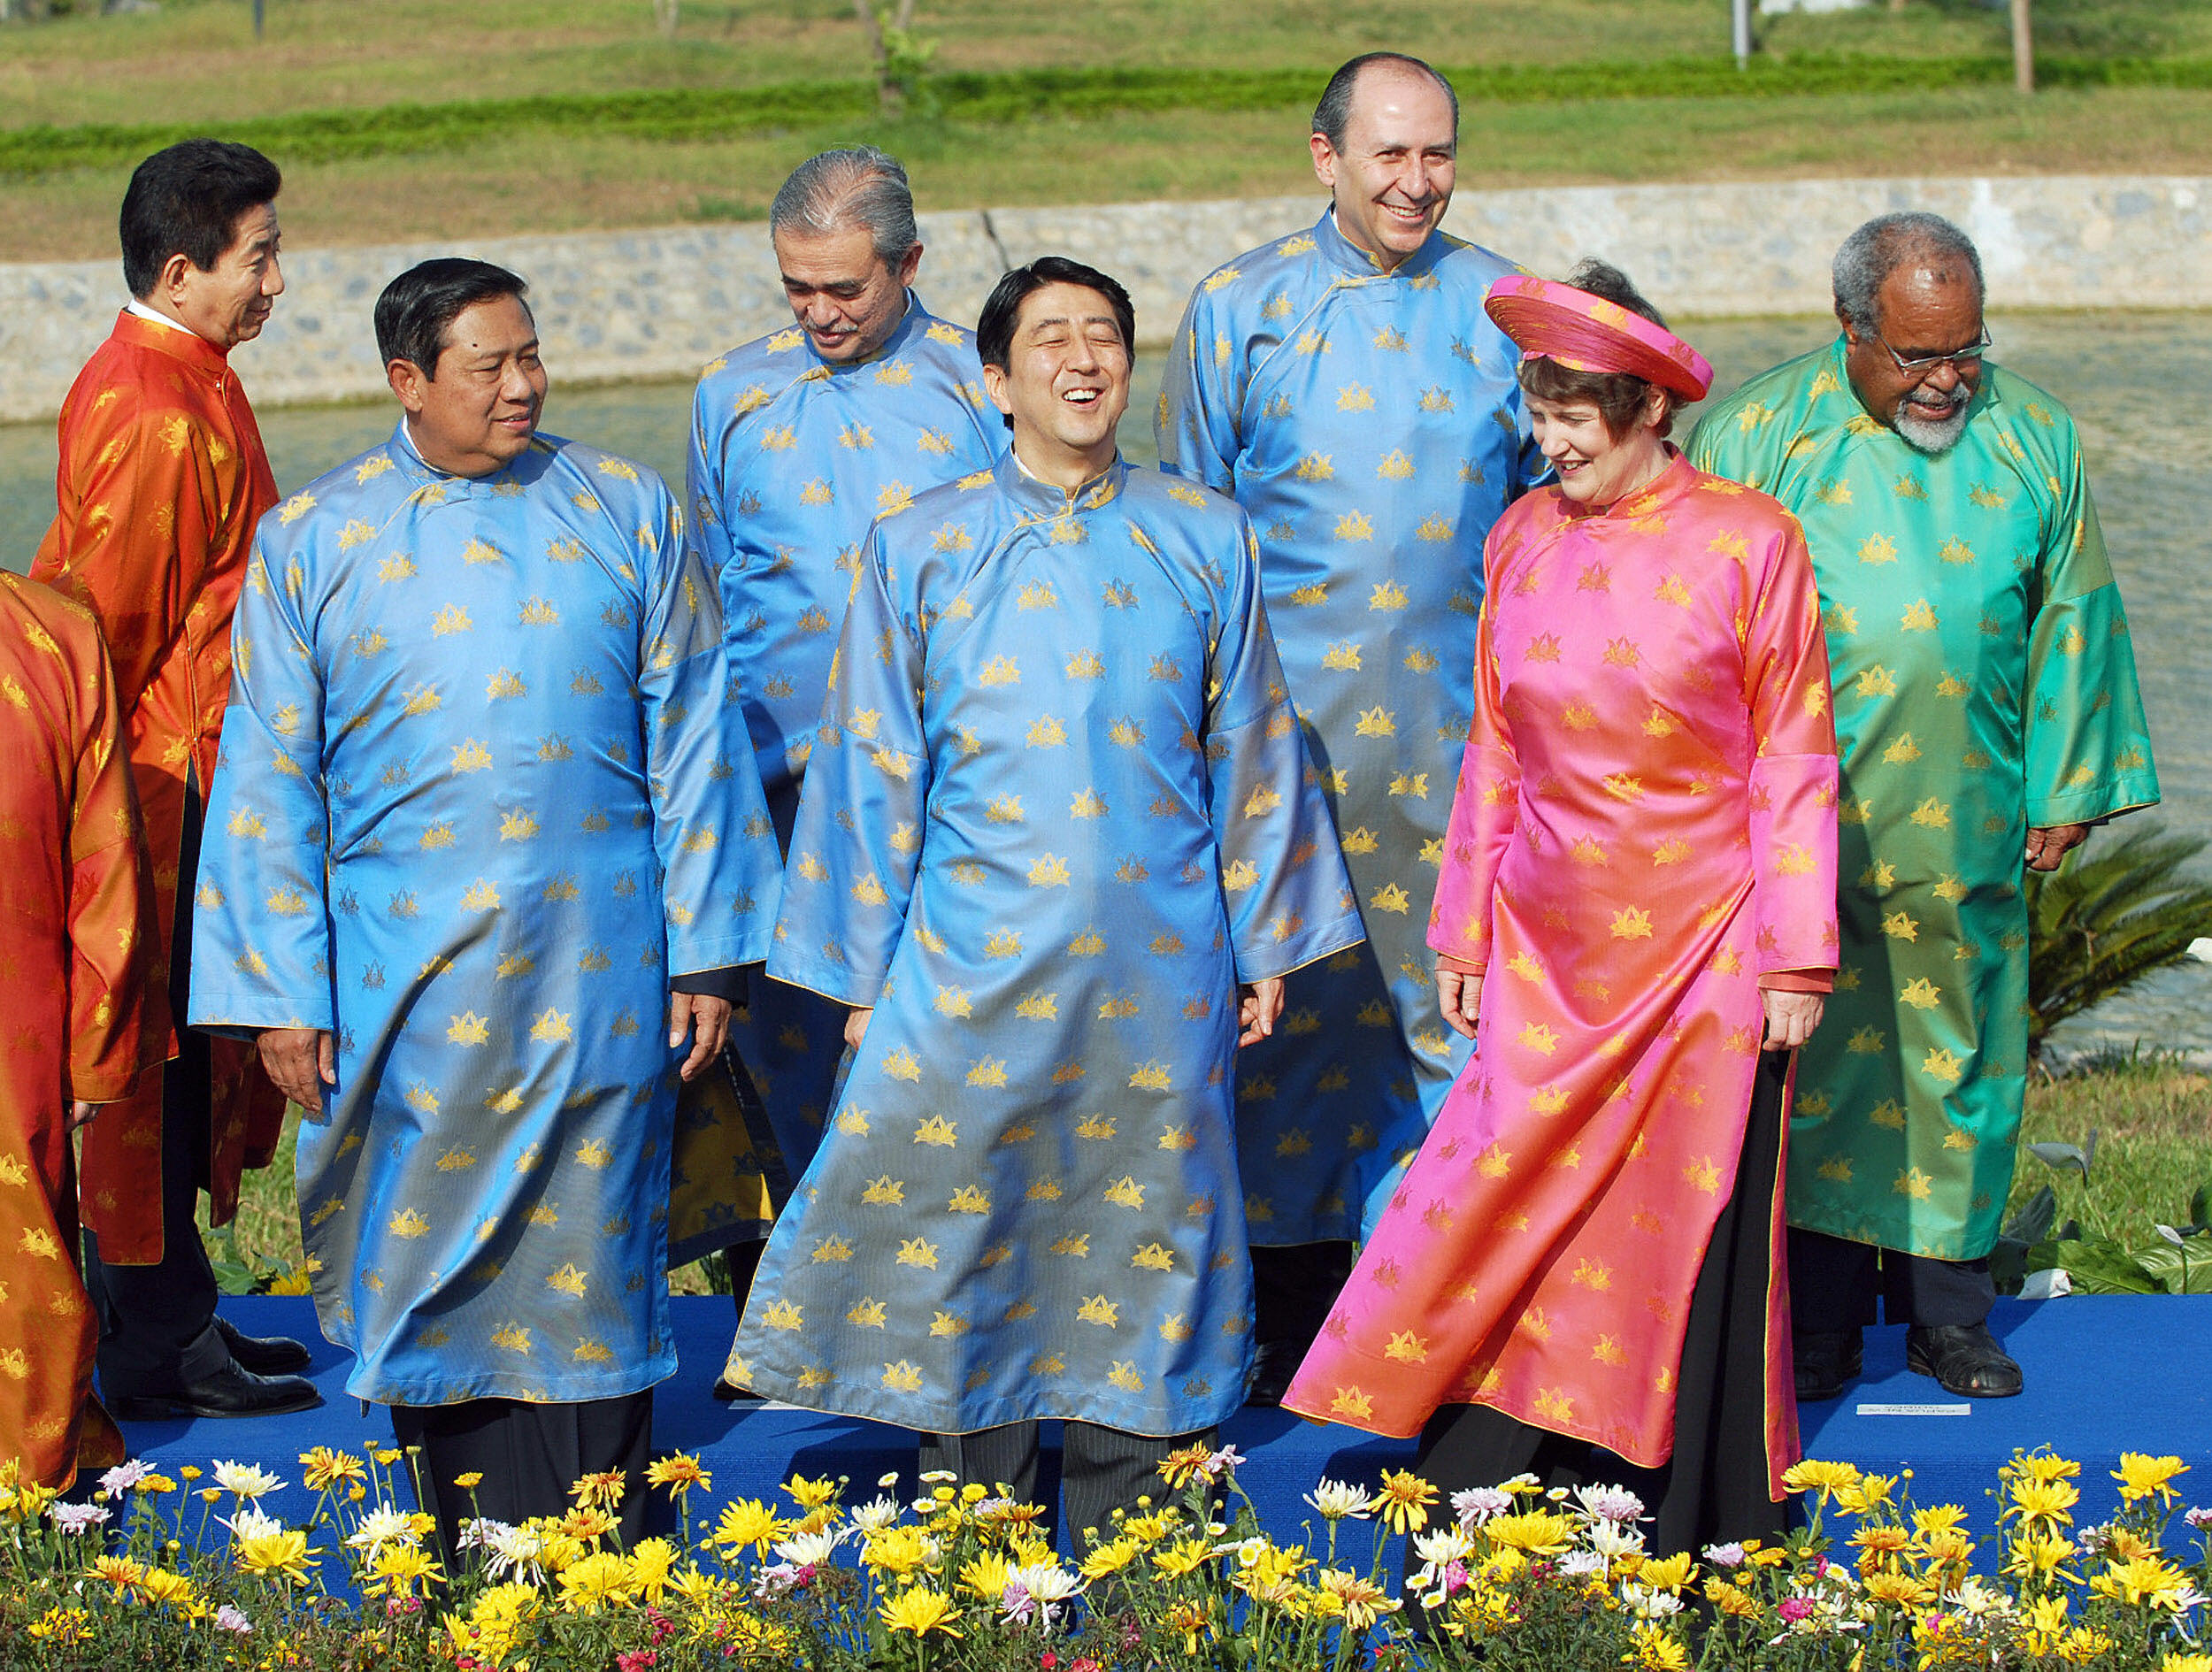 World leaders wearing colorful traditional Vietnamese attire pose for a group photo.